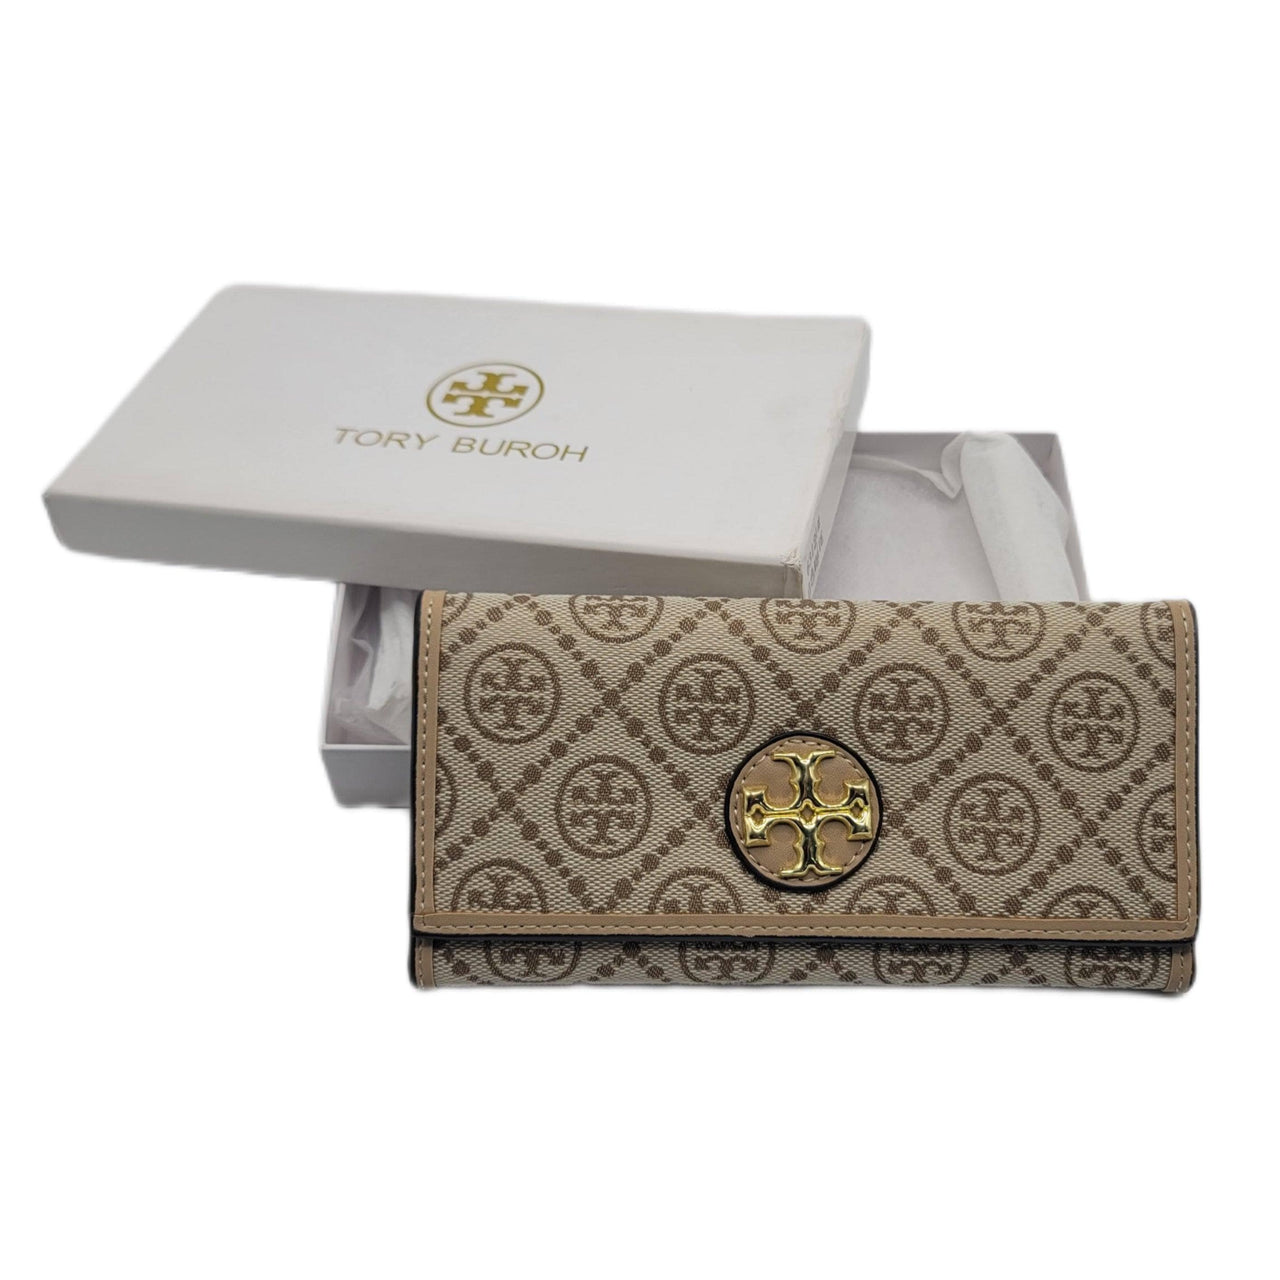 The Bag Couture Luggage & Bags Tory Burch 3 Fold Wallet Beige